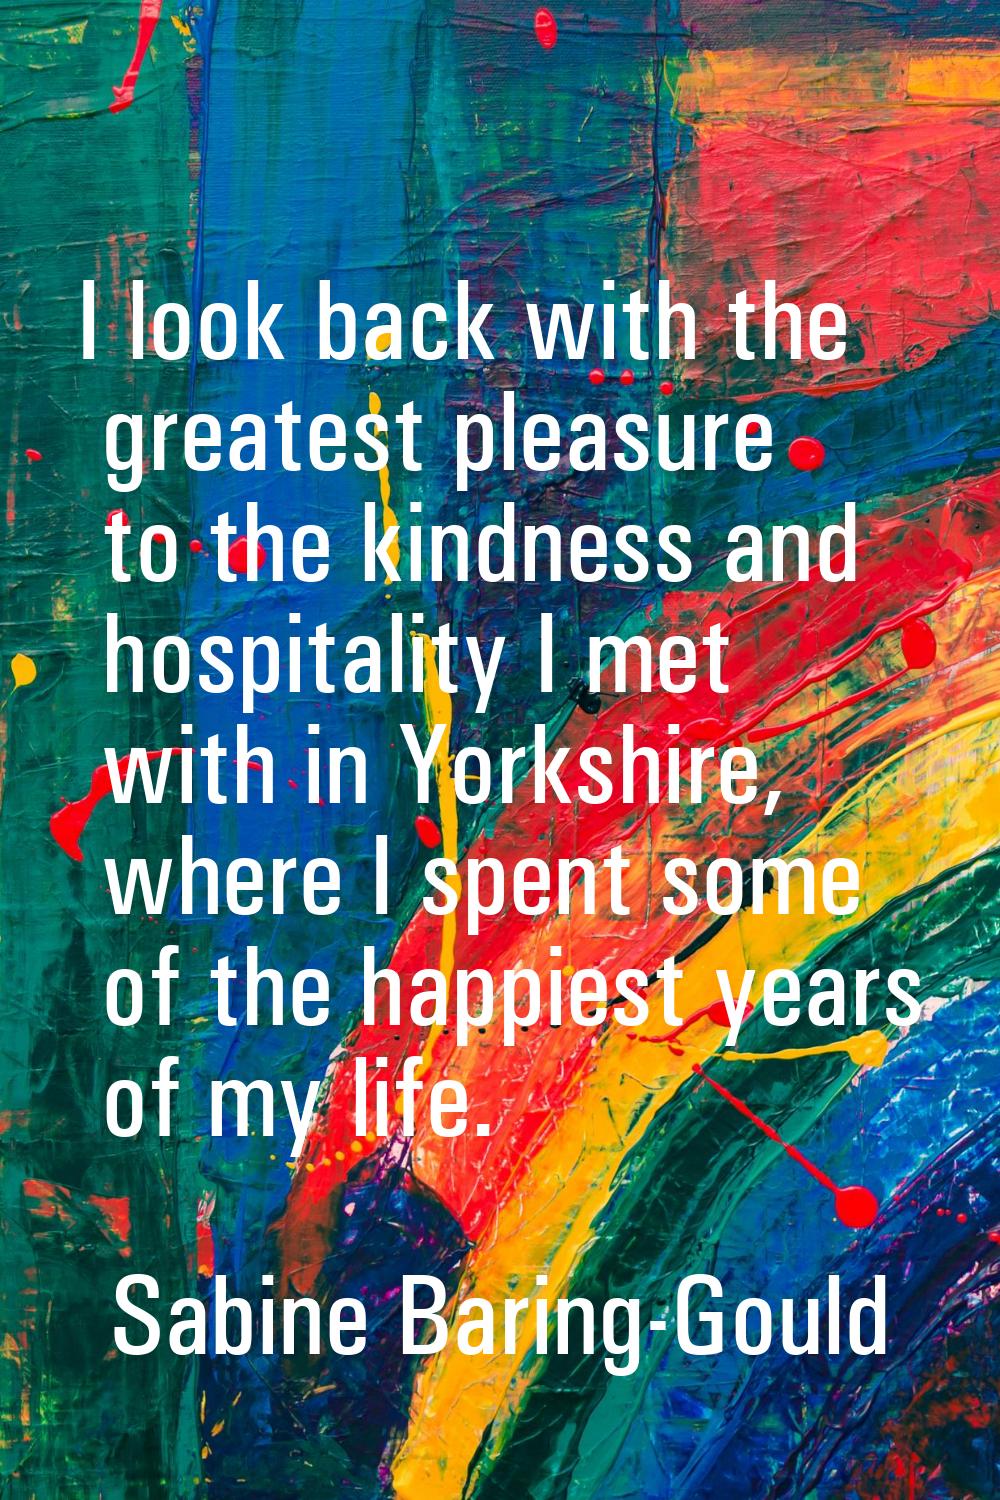 I look back with the greatest pleasure to the kindness and hospitality I met with in Yorkshire, whe